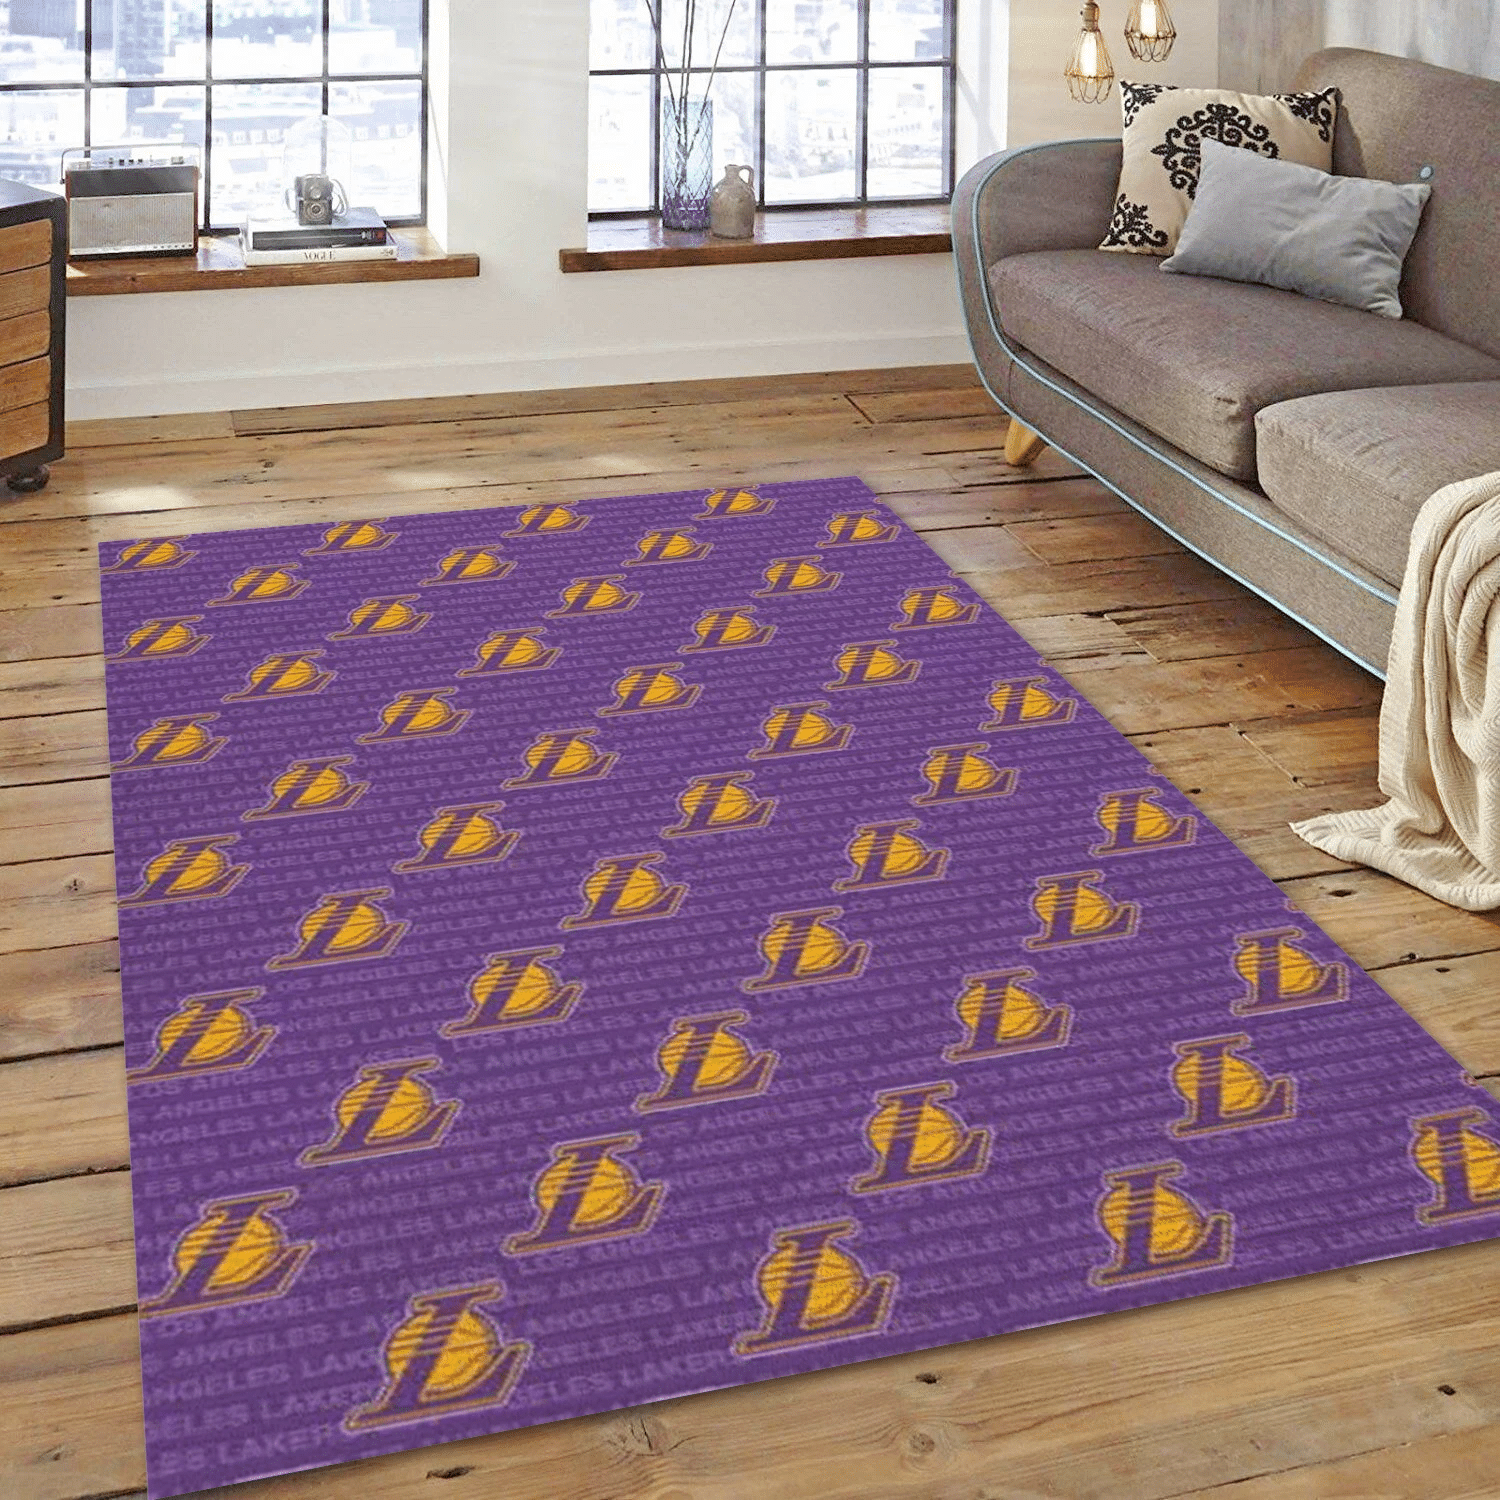 Los Angeles Lakers Patterns 1 Reangle Area Rug, Bedroom Rug - Family Gift US Decor - Indoor Outdoor Rugs 2